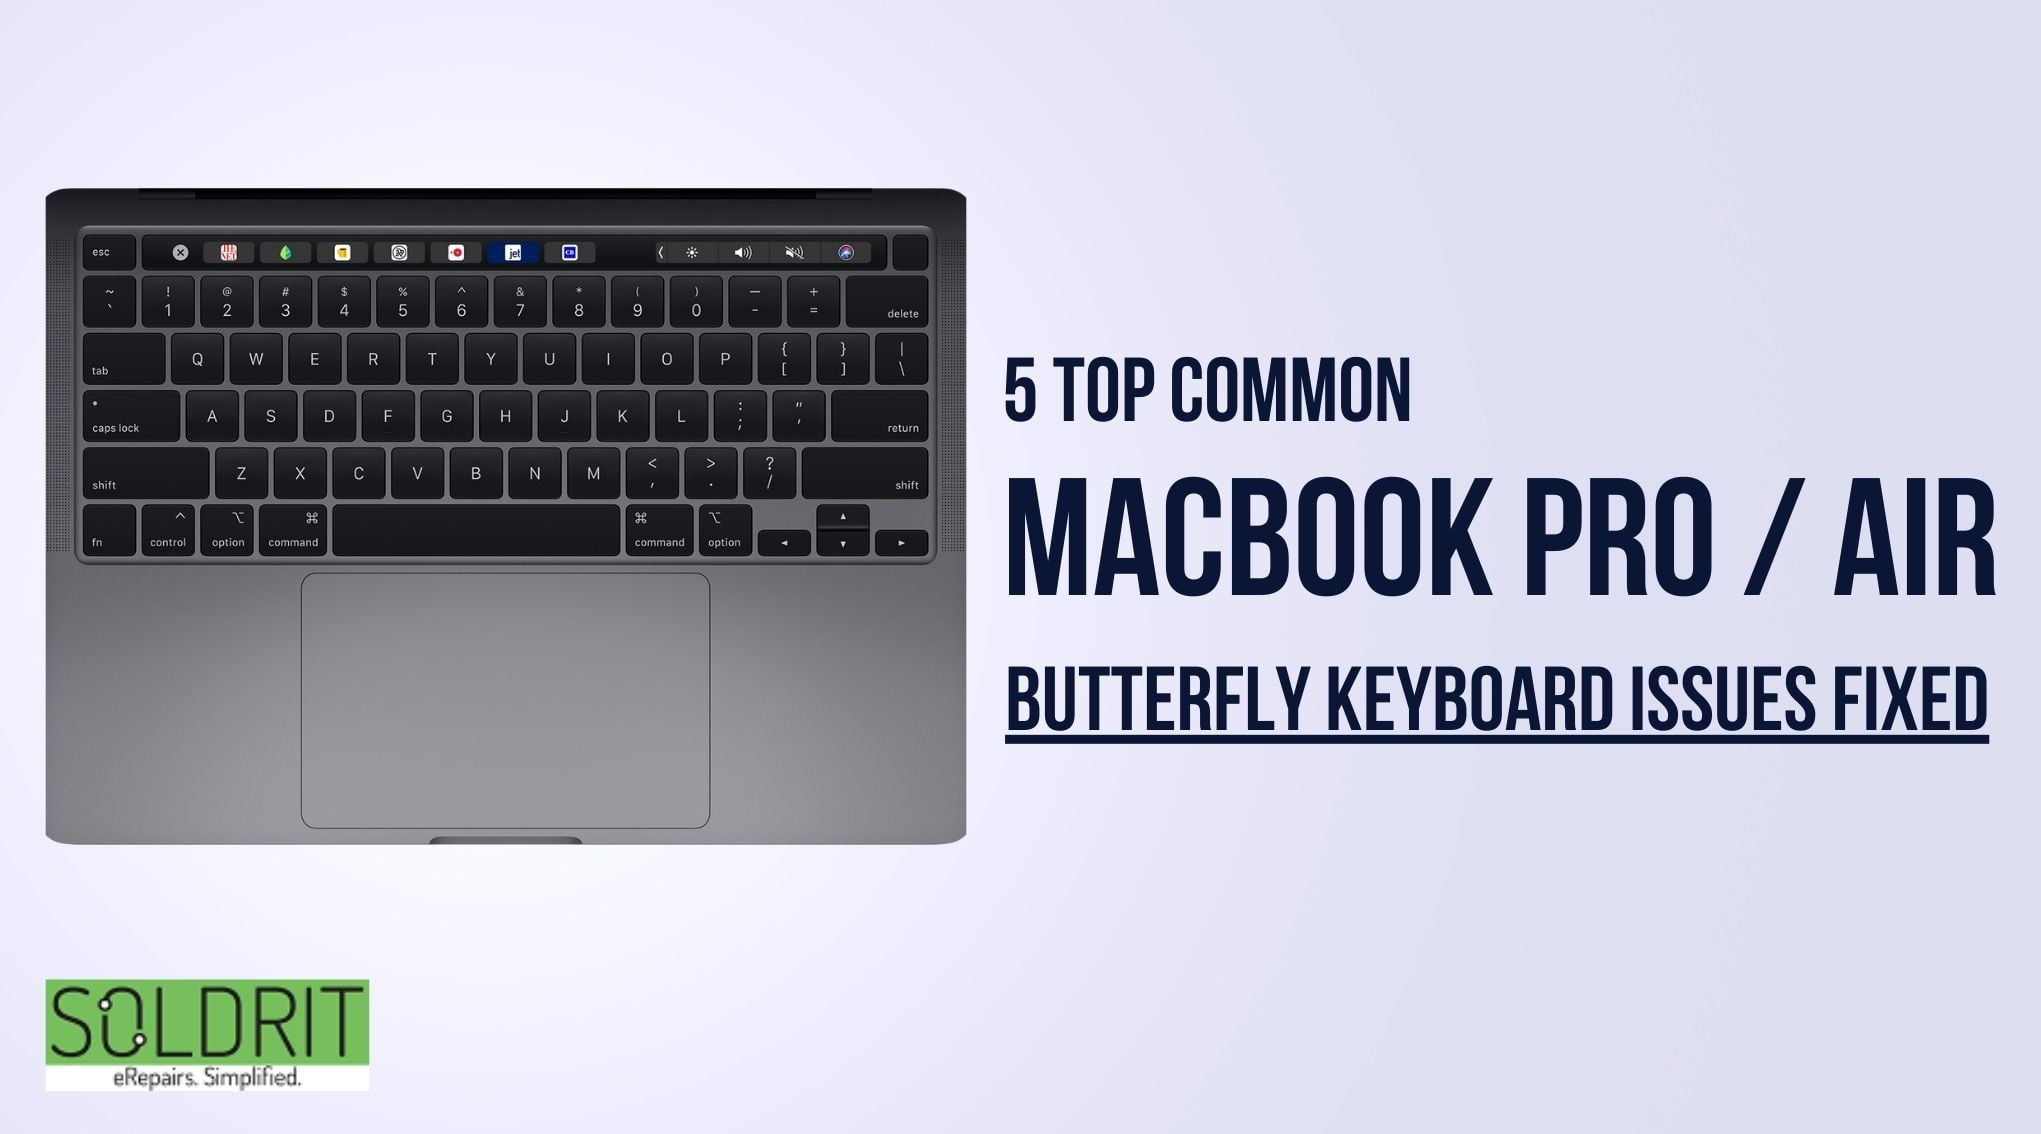 5 Top Common MacBook Pro / Air Butterfly Keyboard Issues Fixed